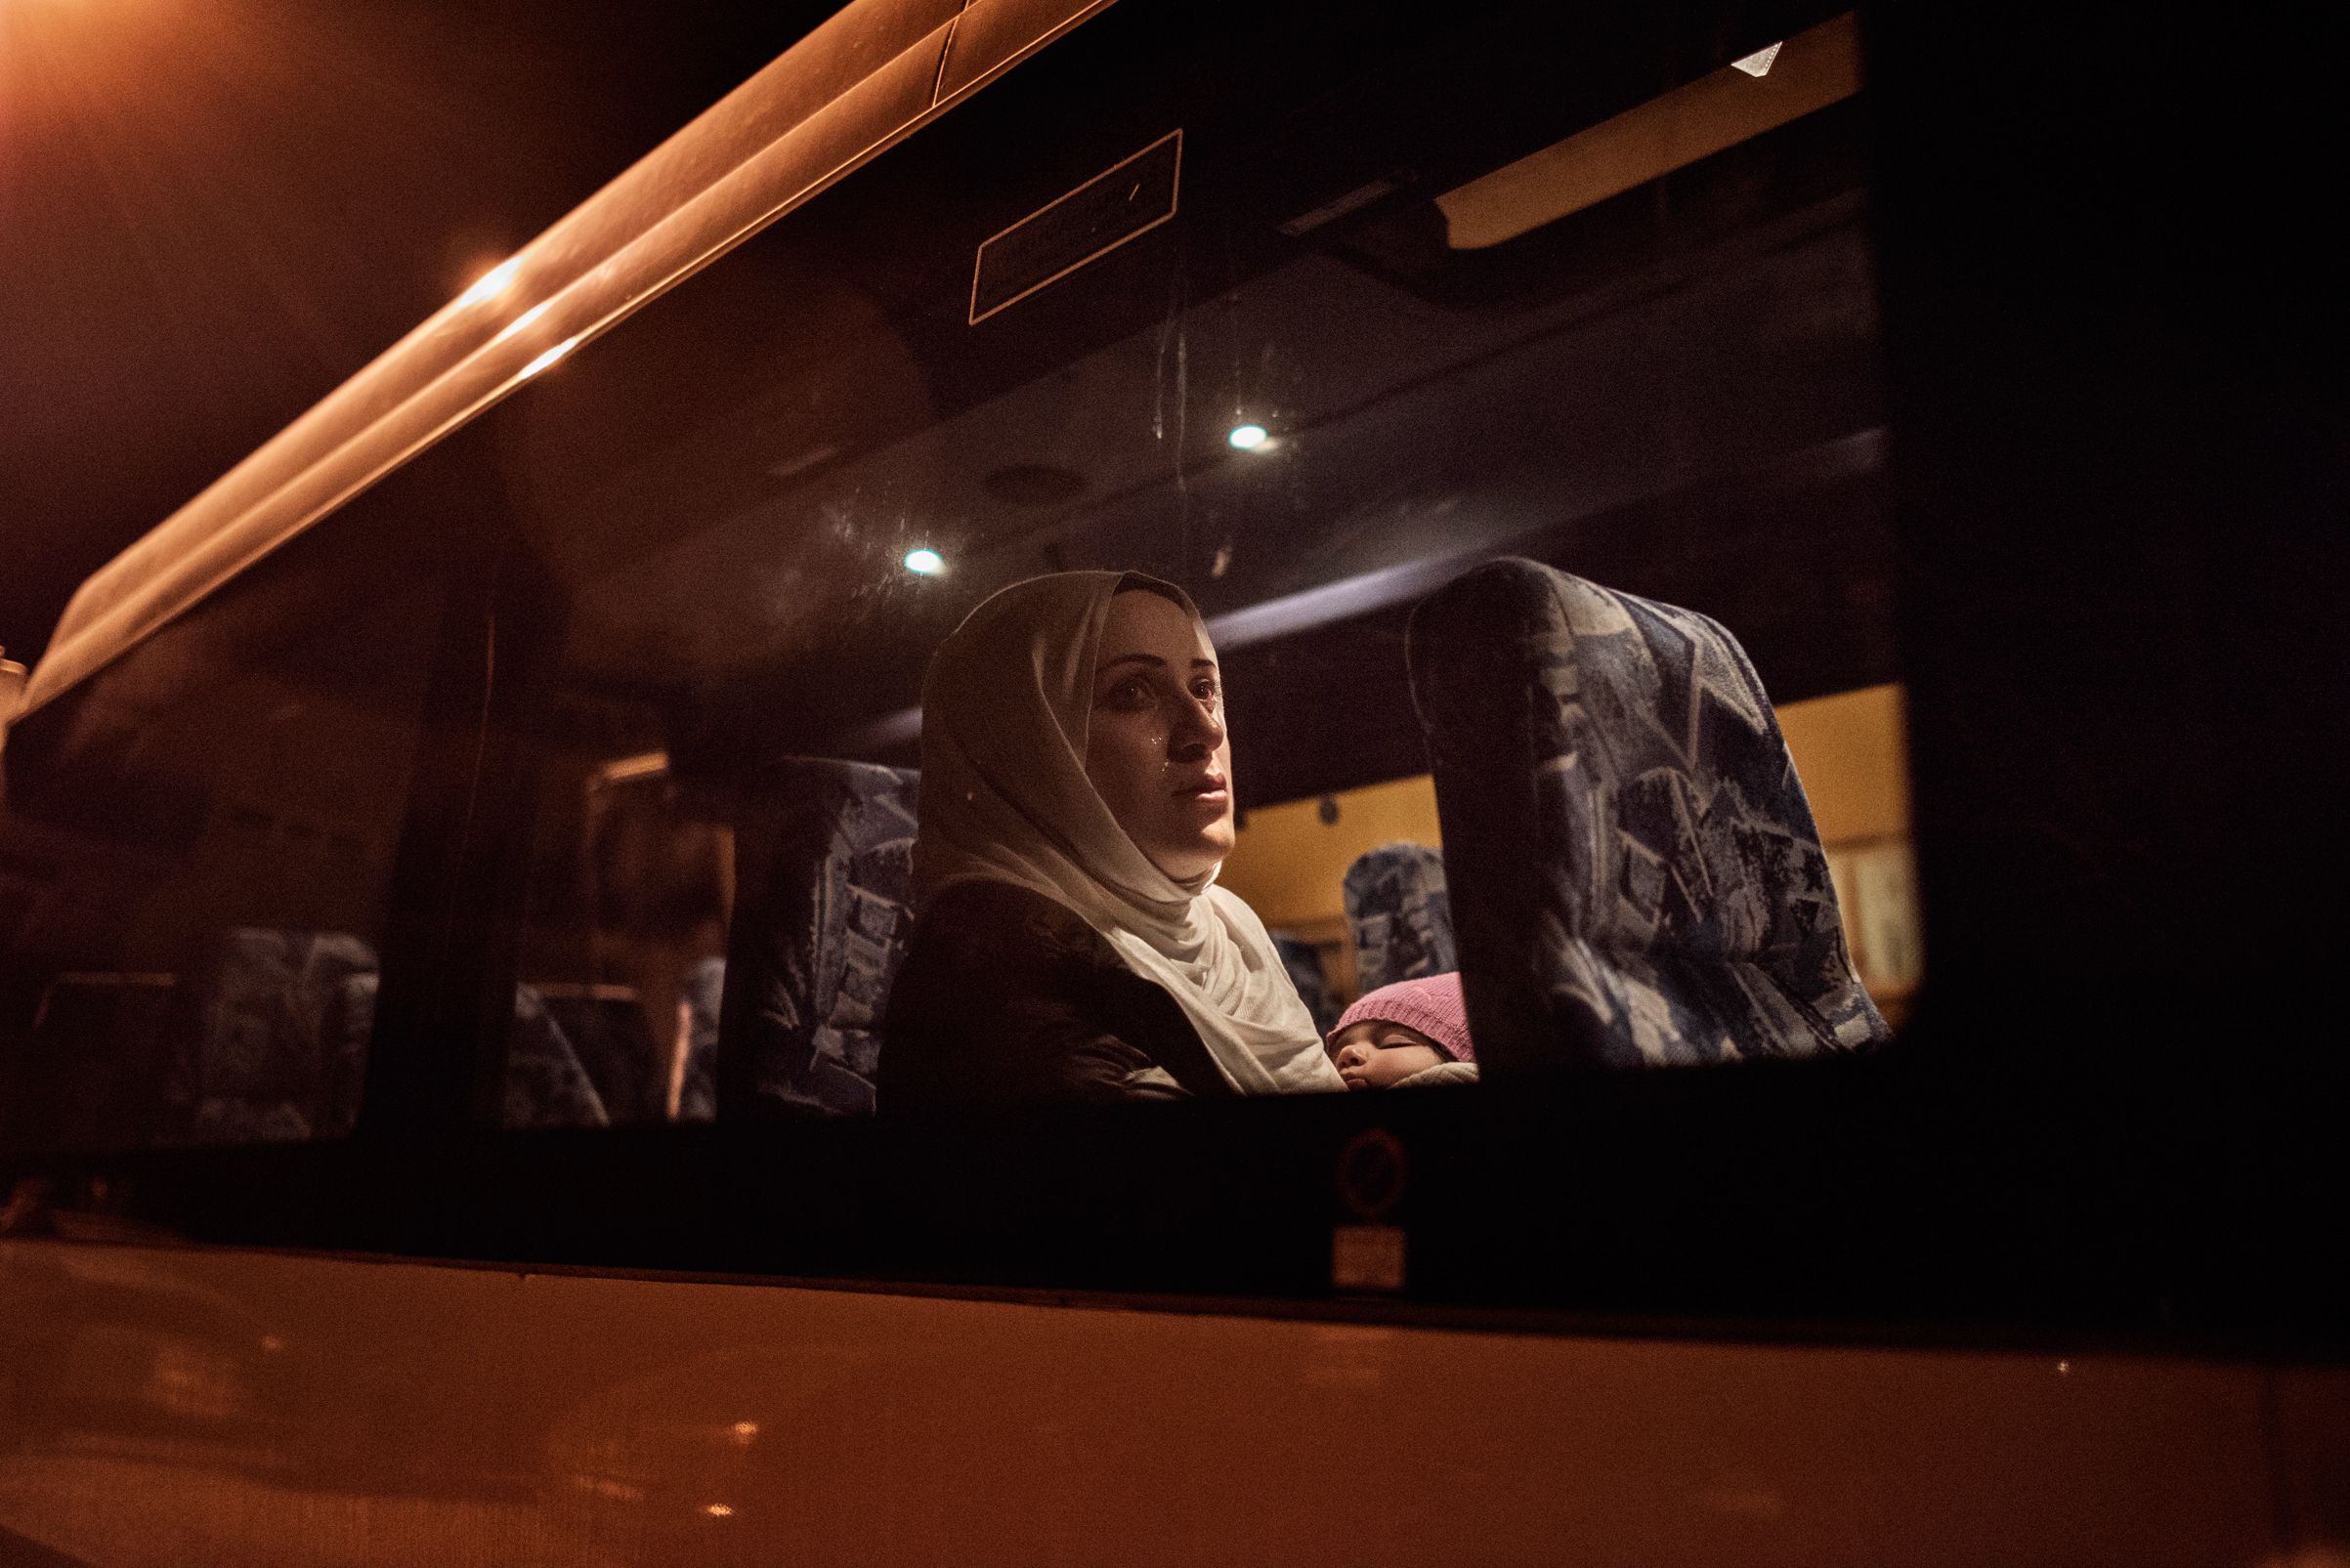 After an exhausting day-long flight, Syrian refugee Taimaa Abazli takes a bus from Talinn, Estonia, to her new home in rural Polva, a village of 6000 people. Photo by Lynsey Addario. Estonia, 2017.